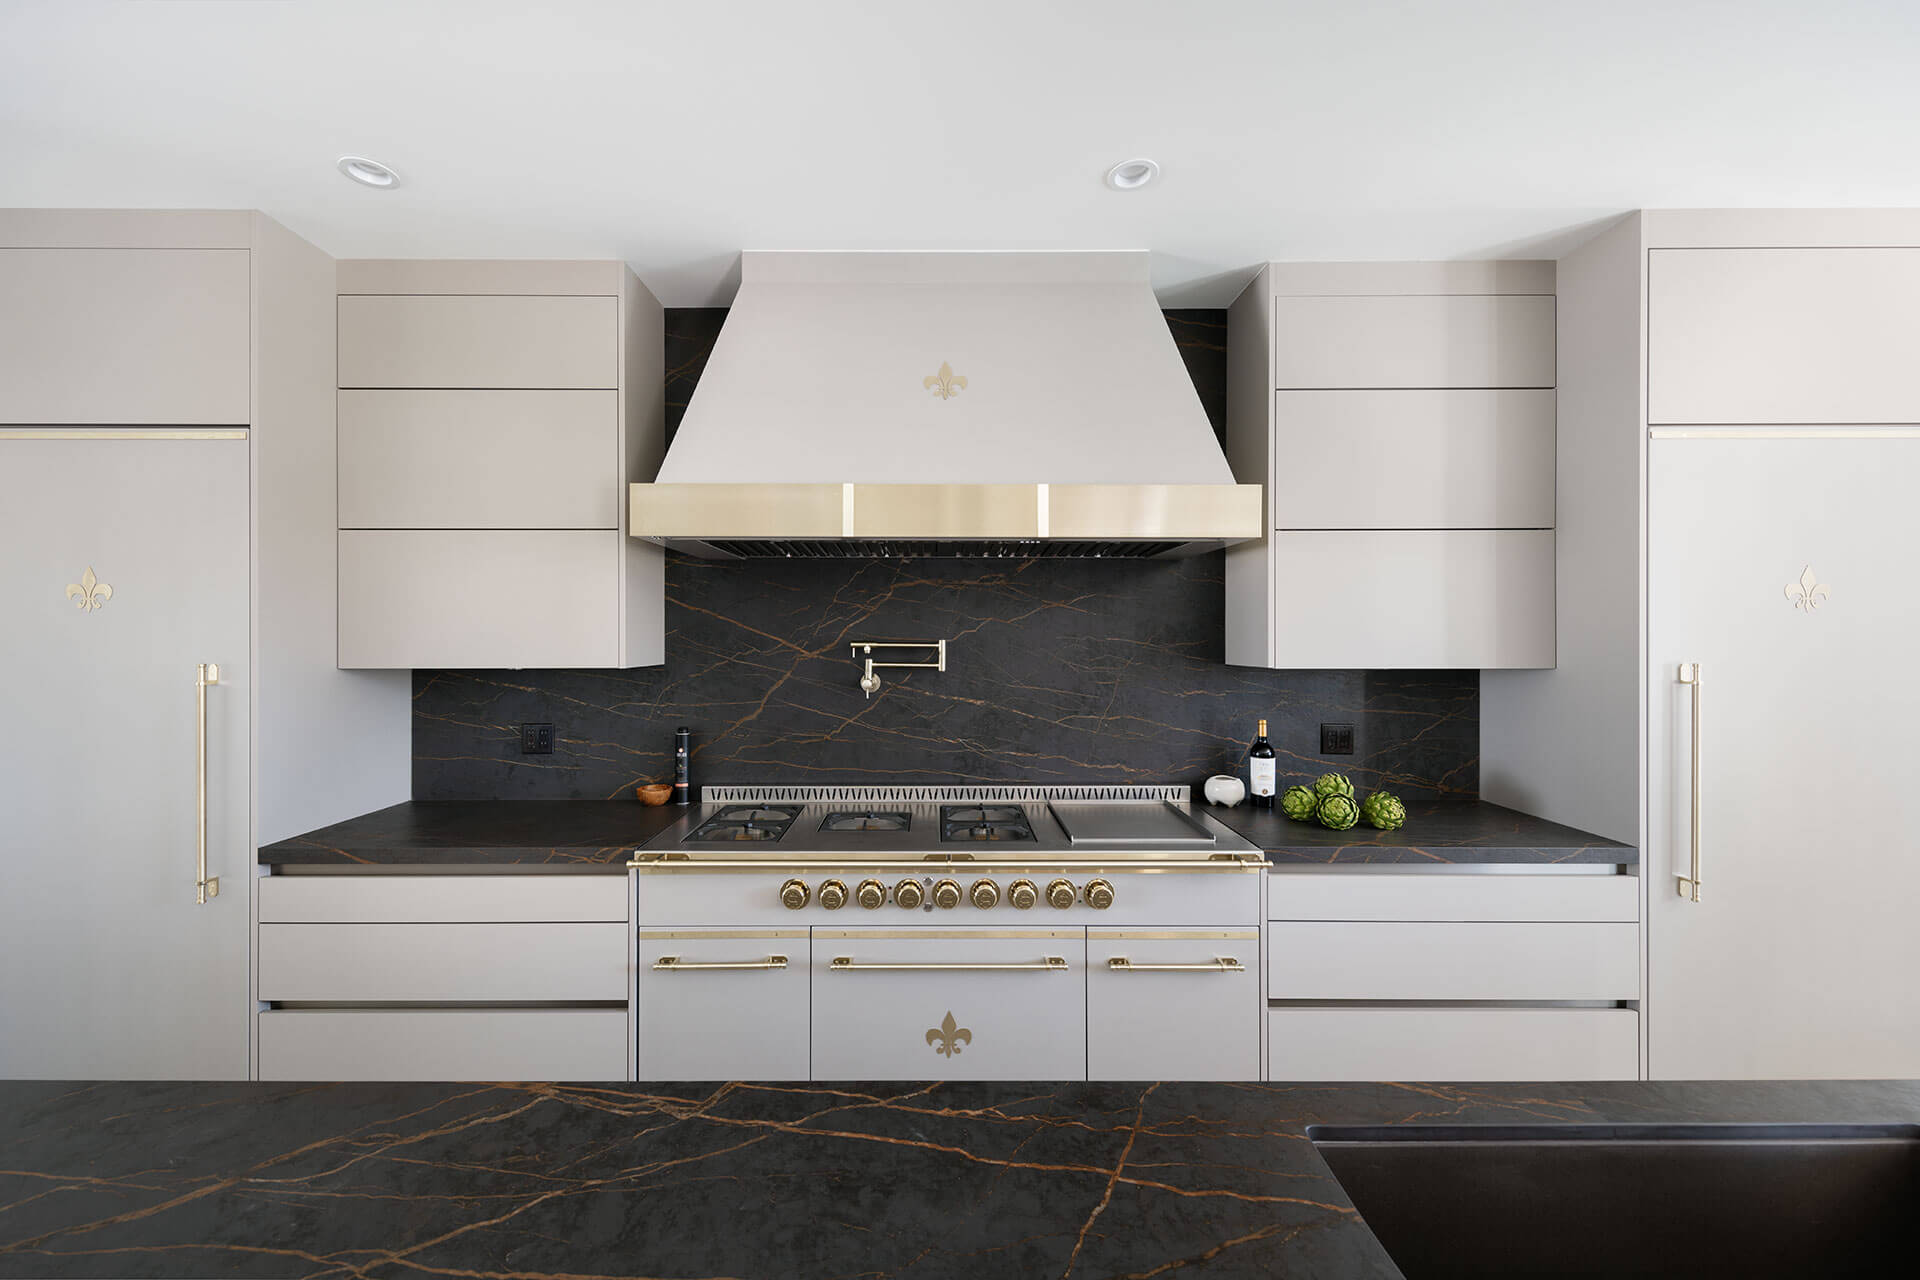 White Luxury Kitchen Ranges Golden Burners and Handles, White Wall Cabinets and Kitchen Hood